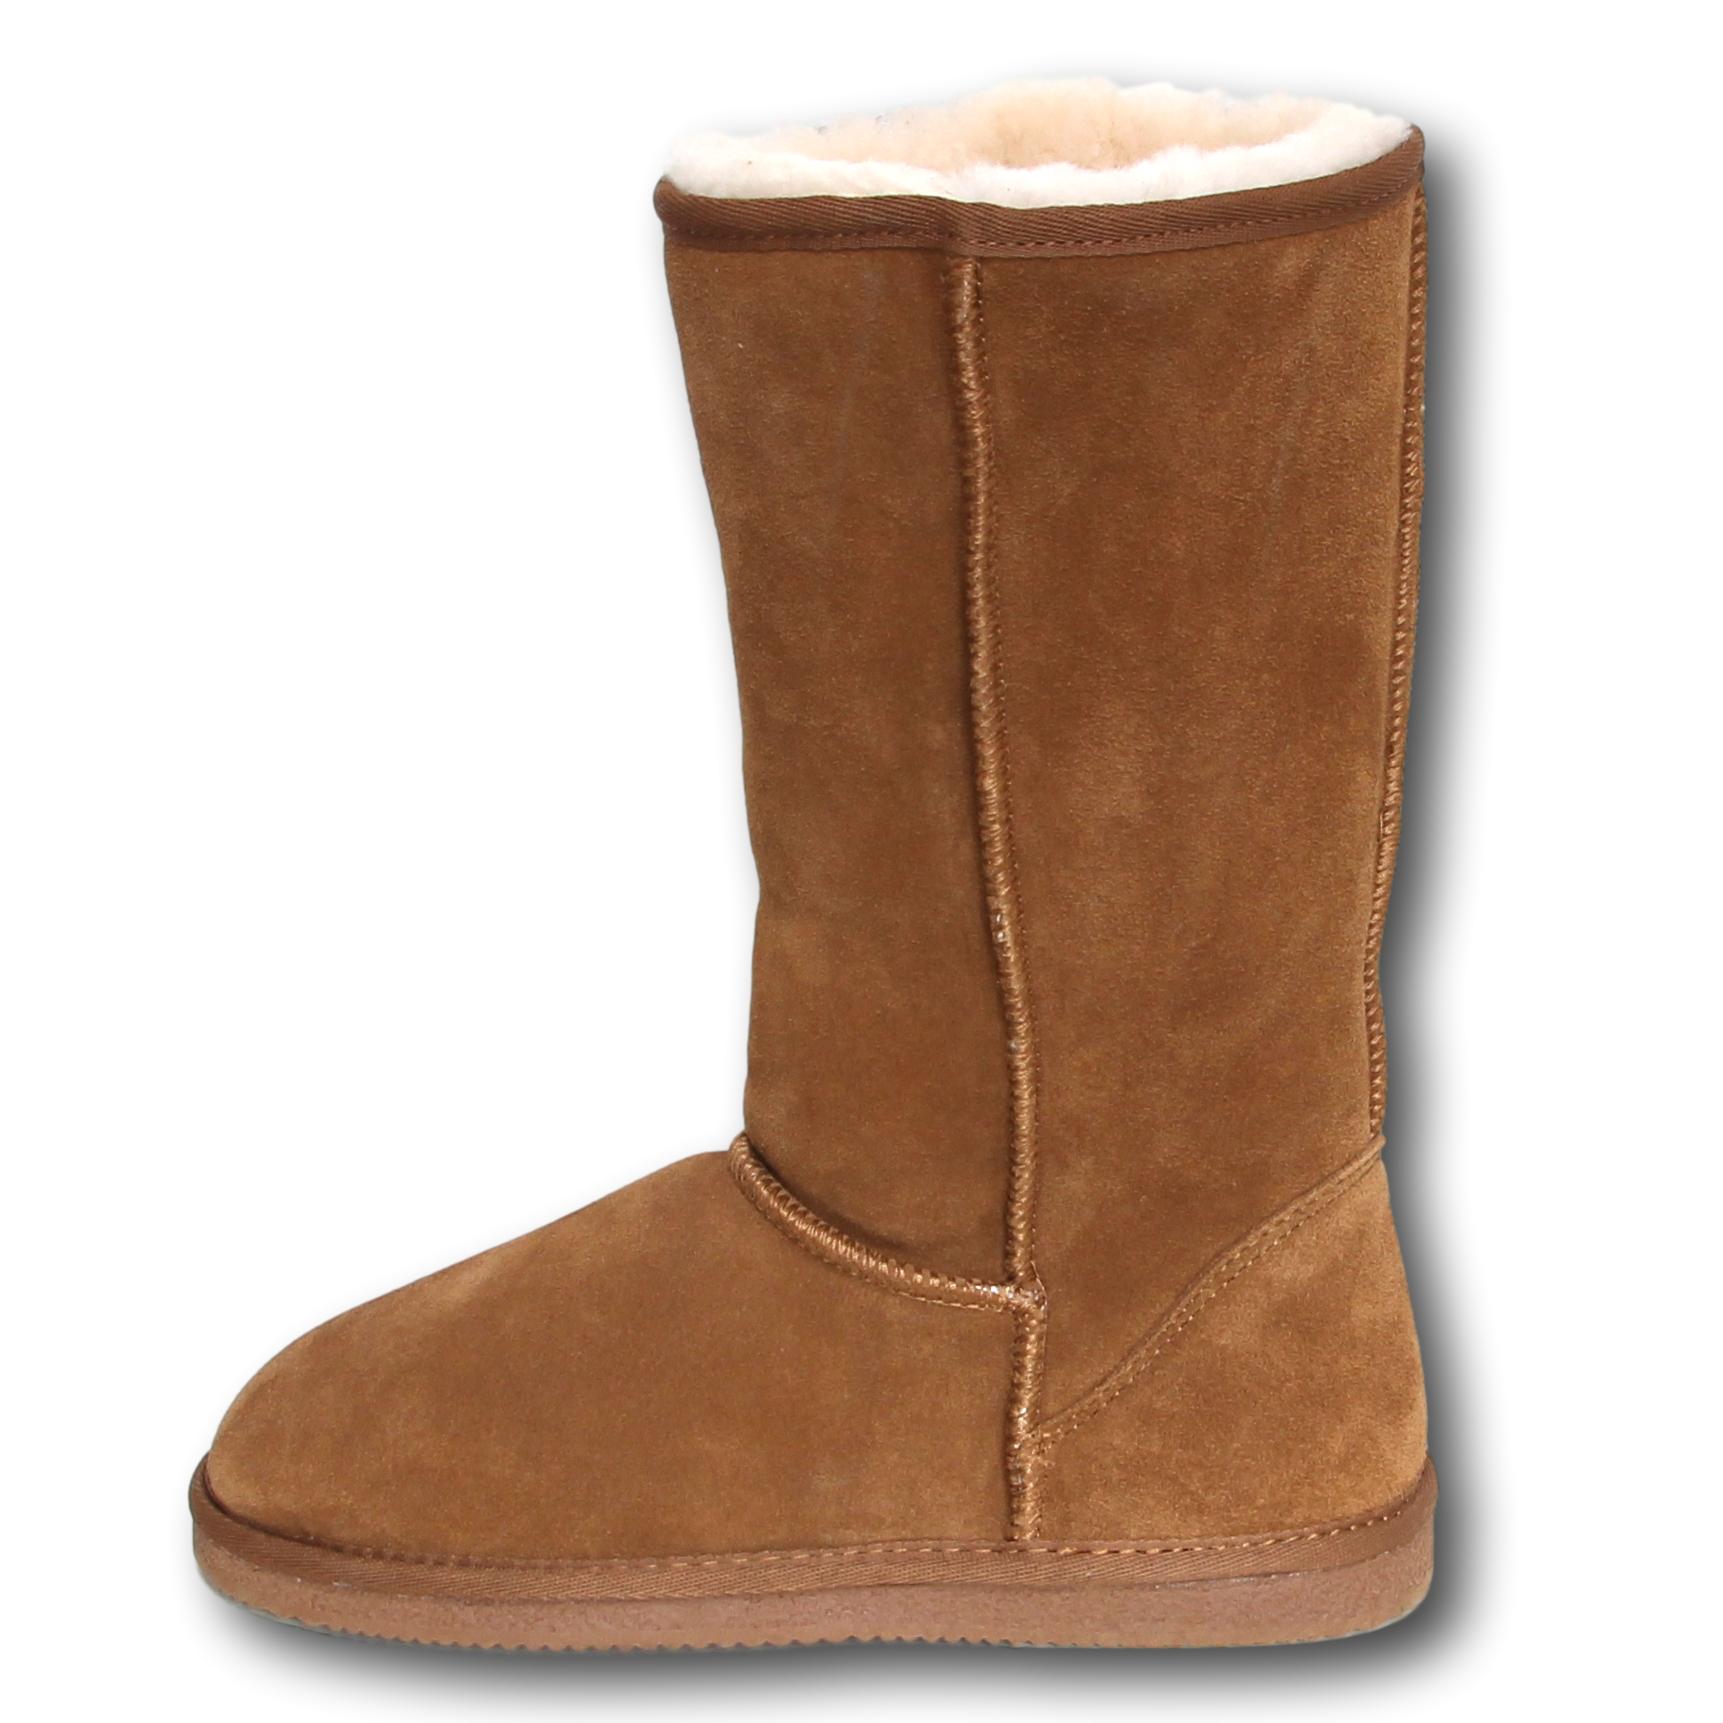 Deluxe Ladies 'Kate' Sheepskin Tall Boots - Chestnut